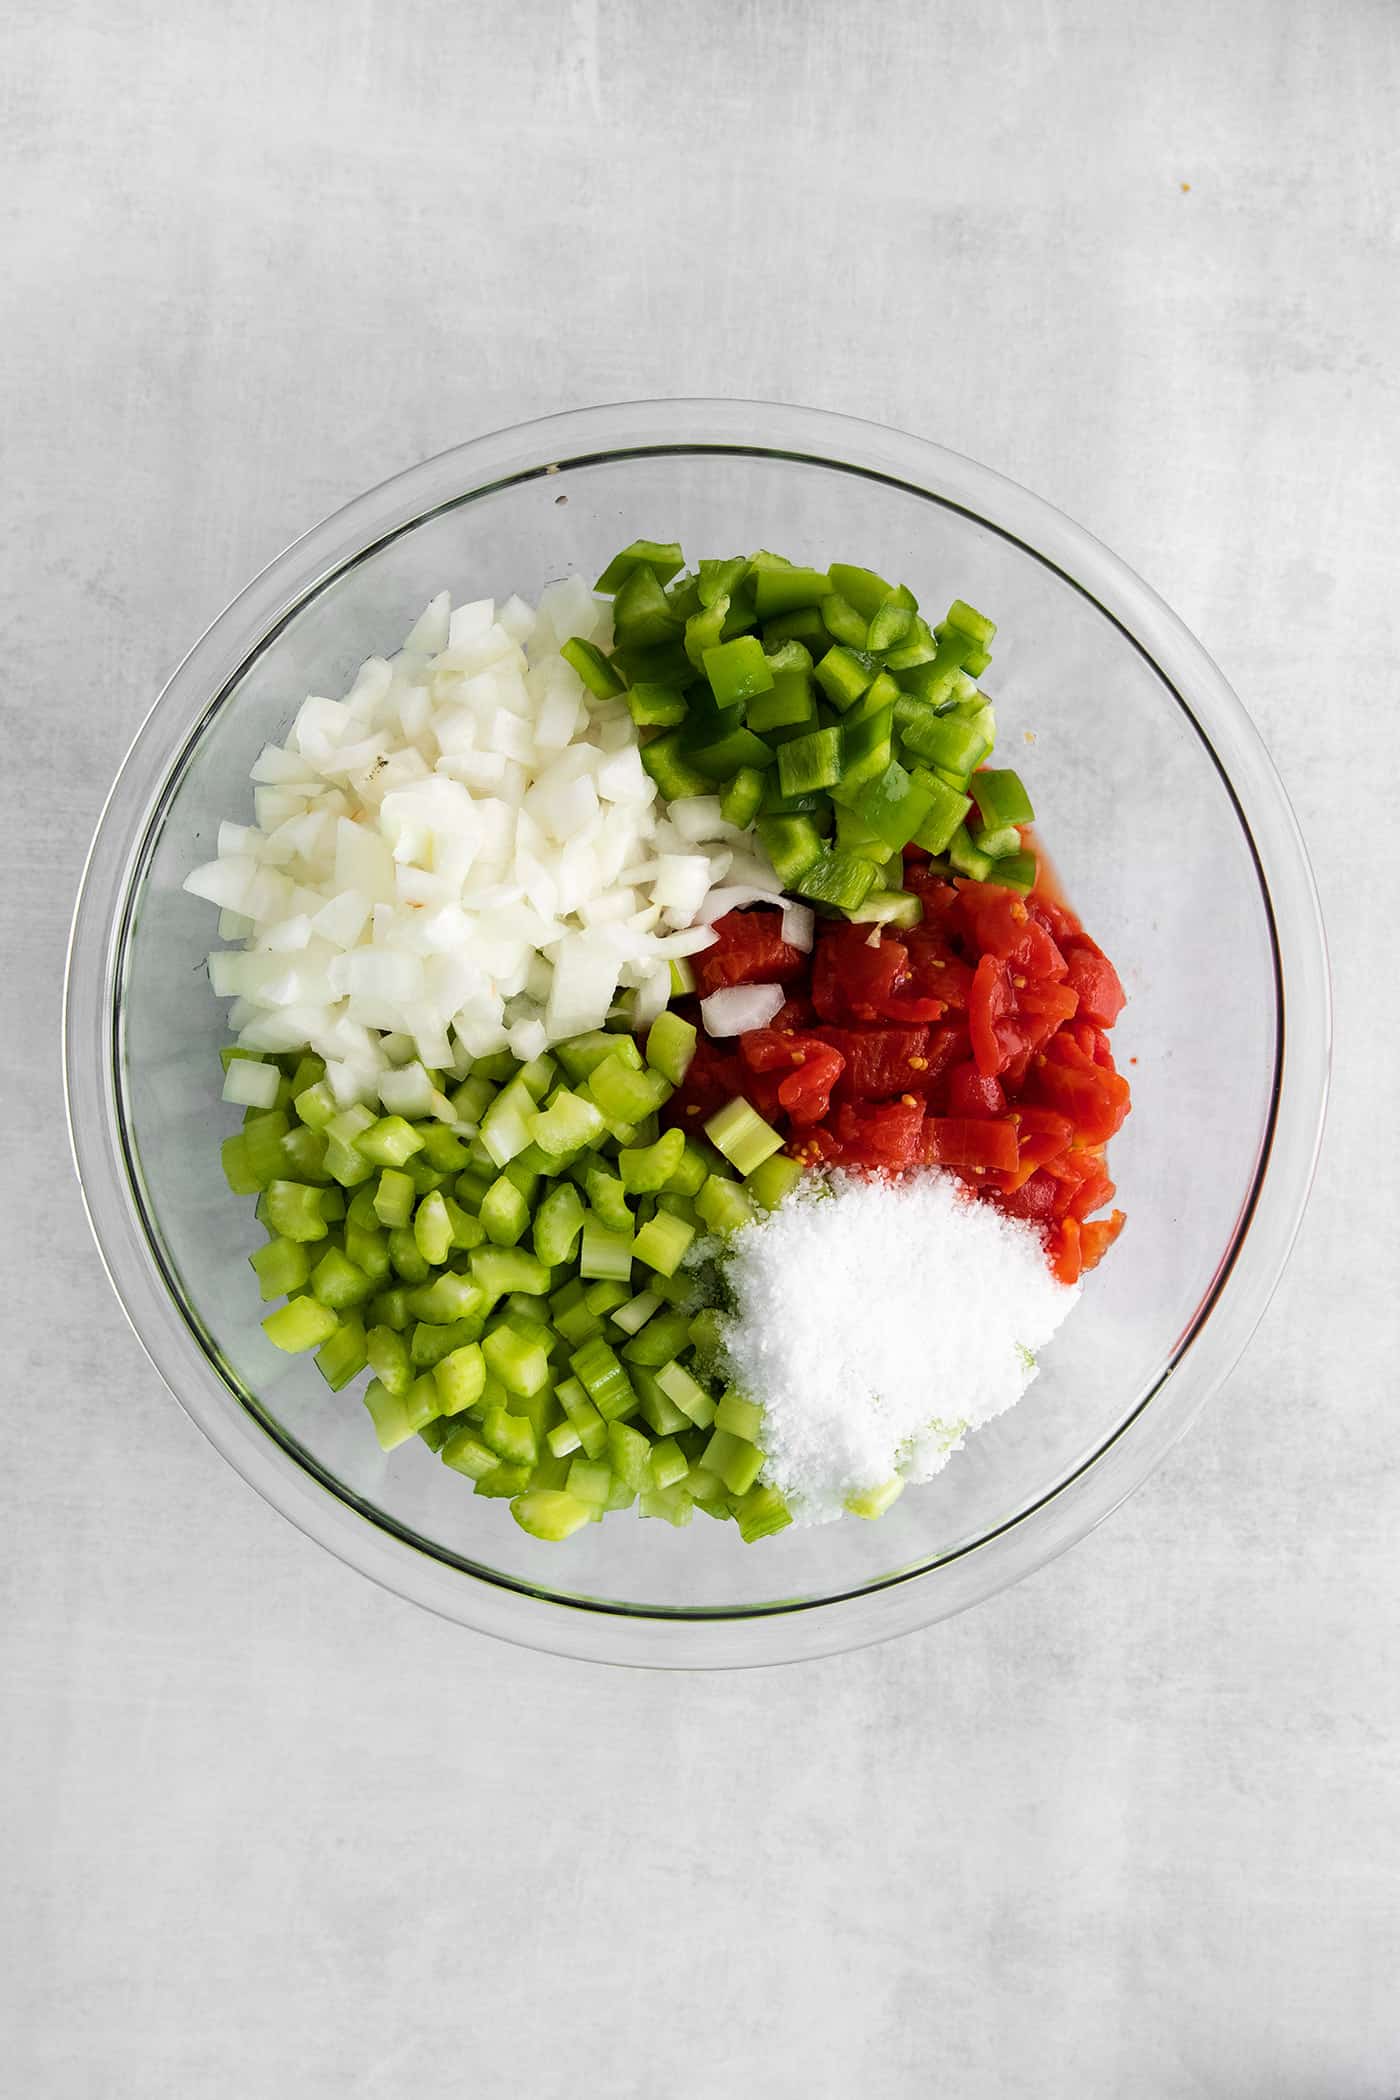 Peppers, tomatoes, celery, and onions in a glass bowl